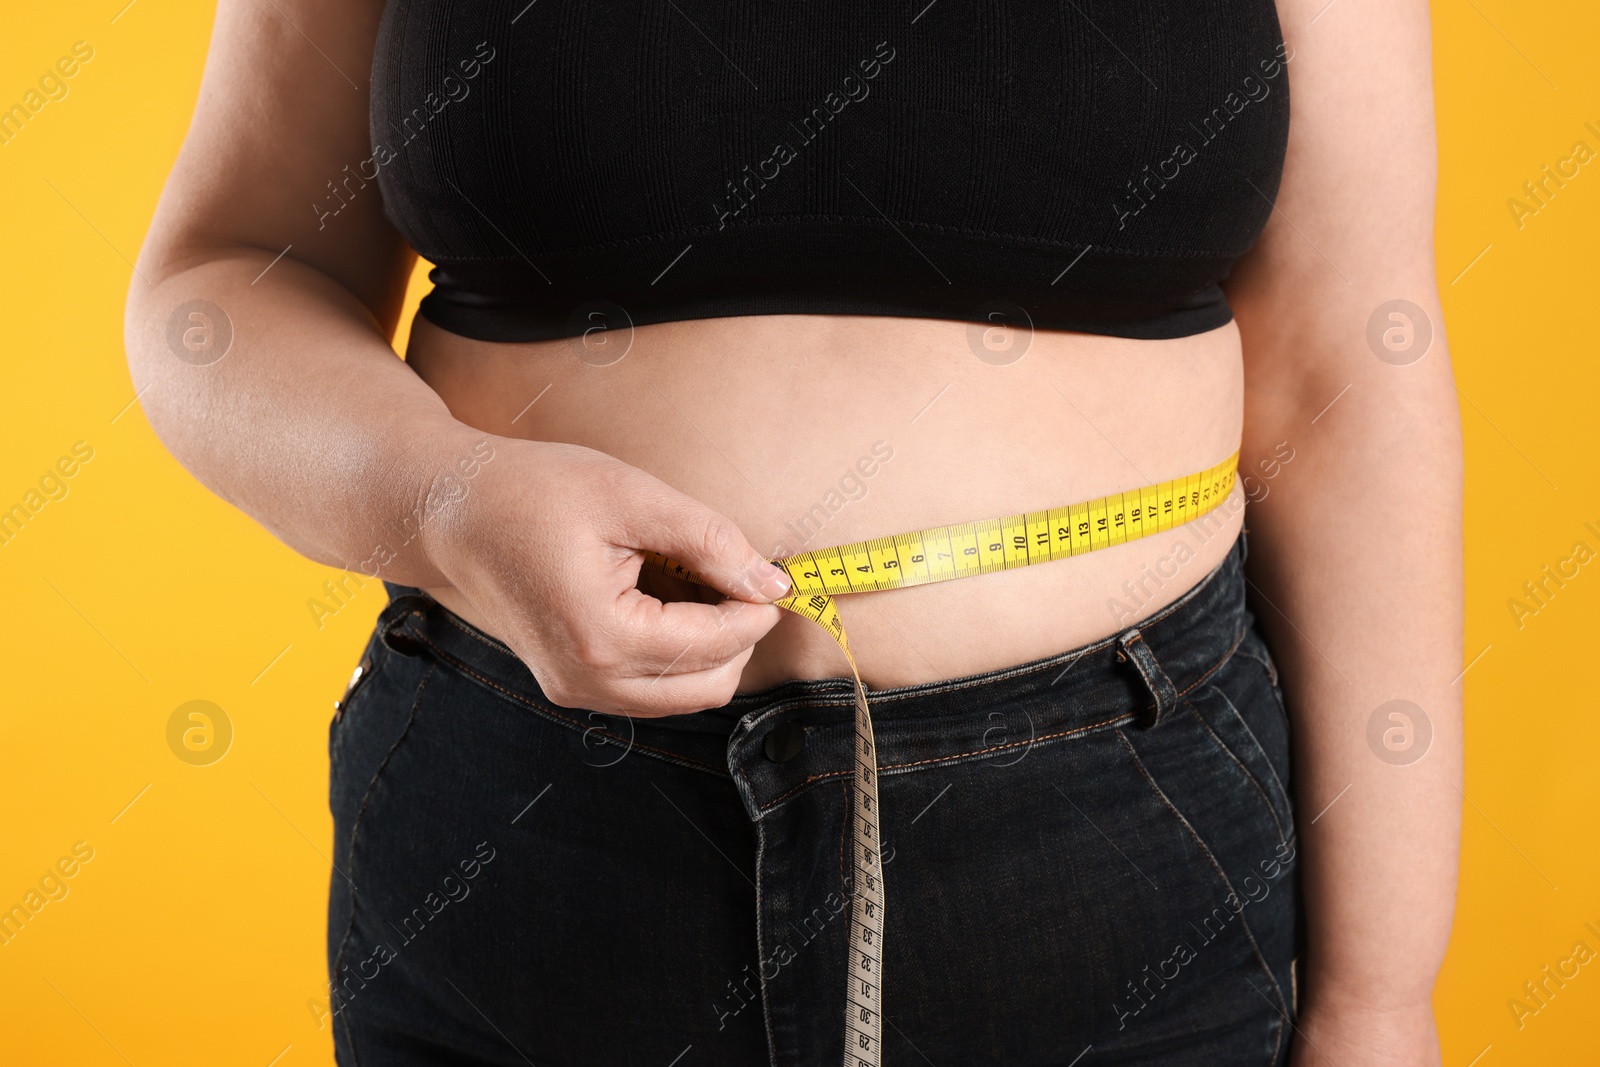 Photo of Overweight woman measuring waist with tape on orange background, closeup